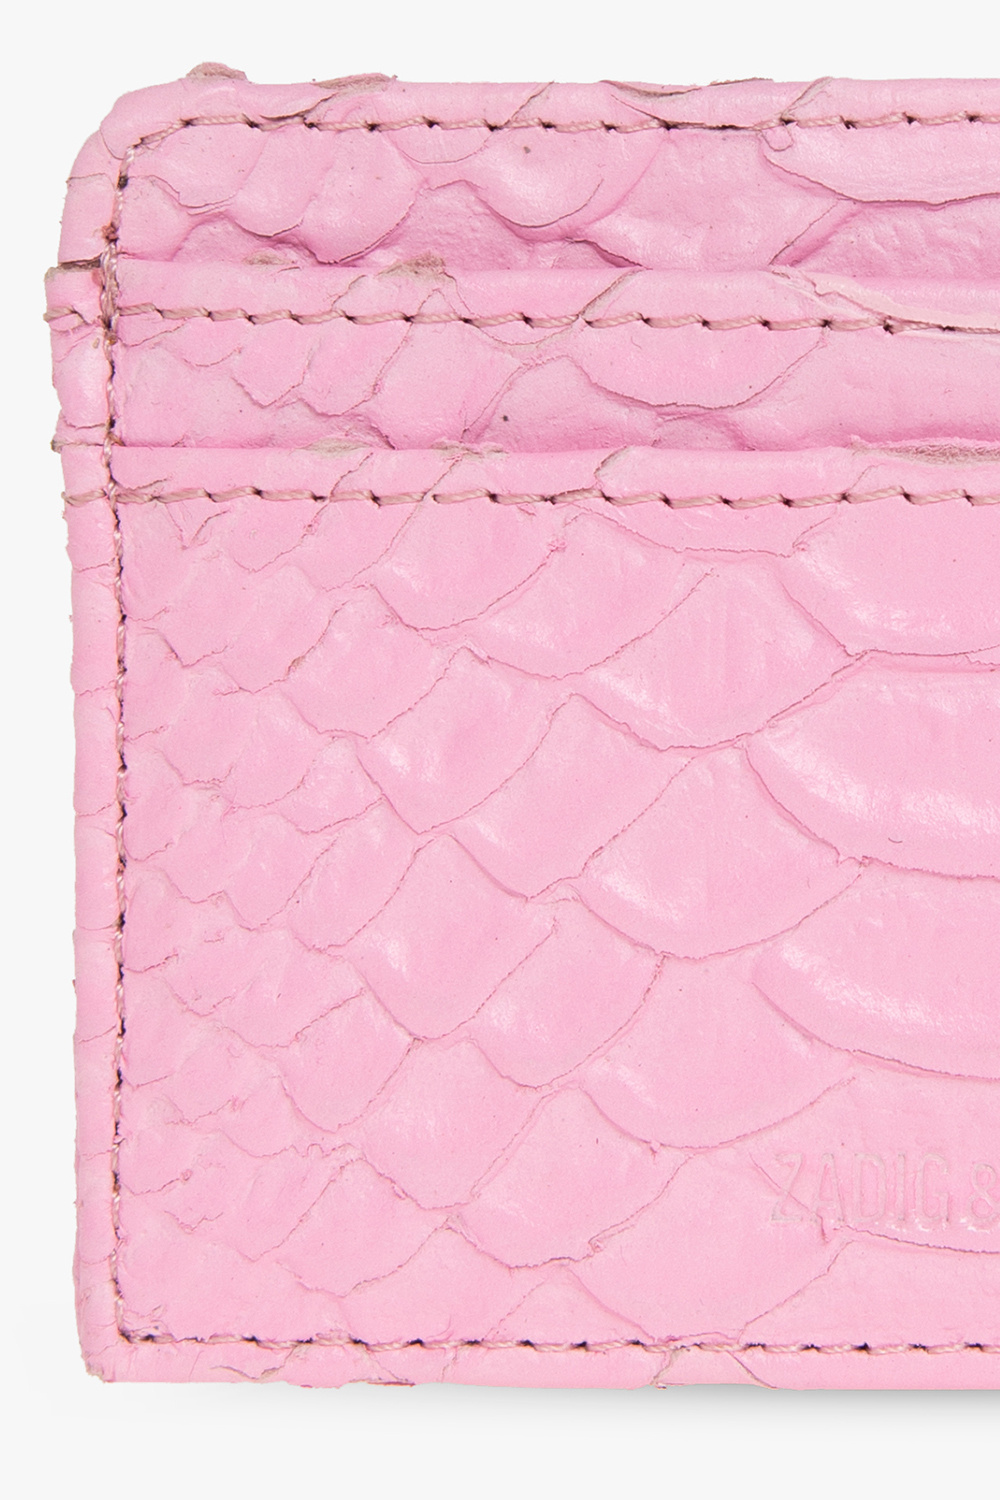 Zadig & Voltaire Leather Card Case Women's Pink